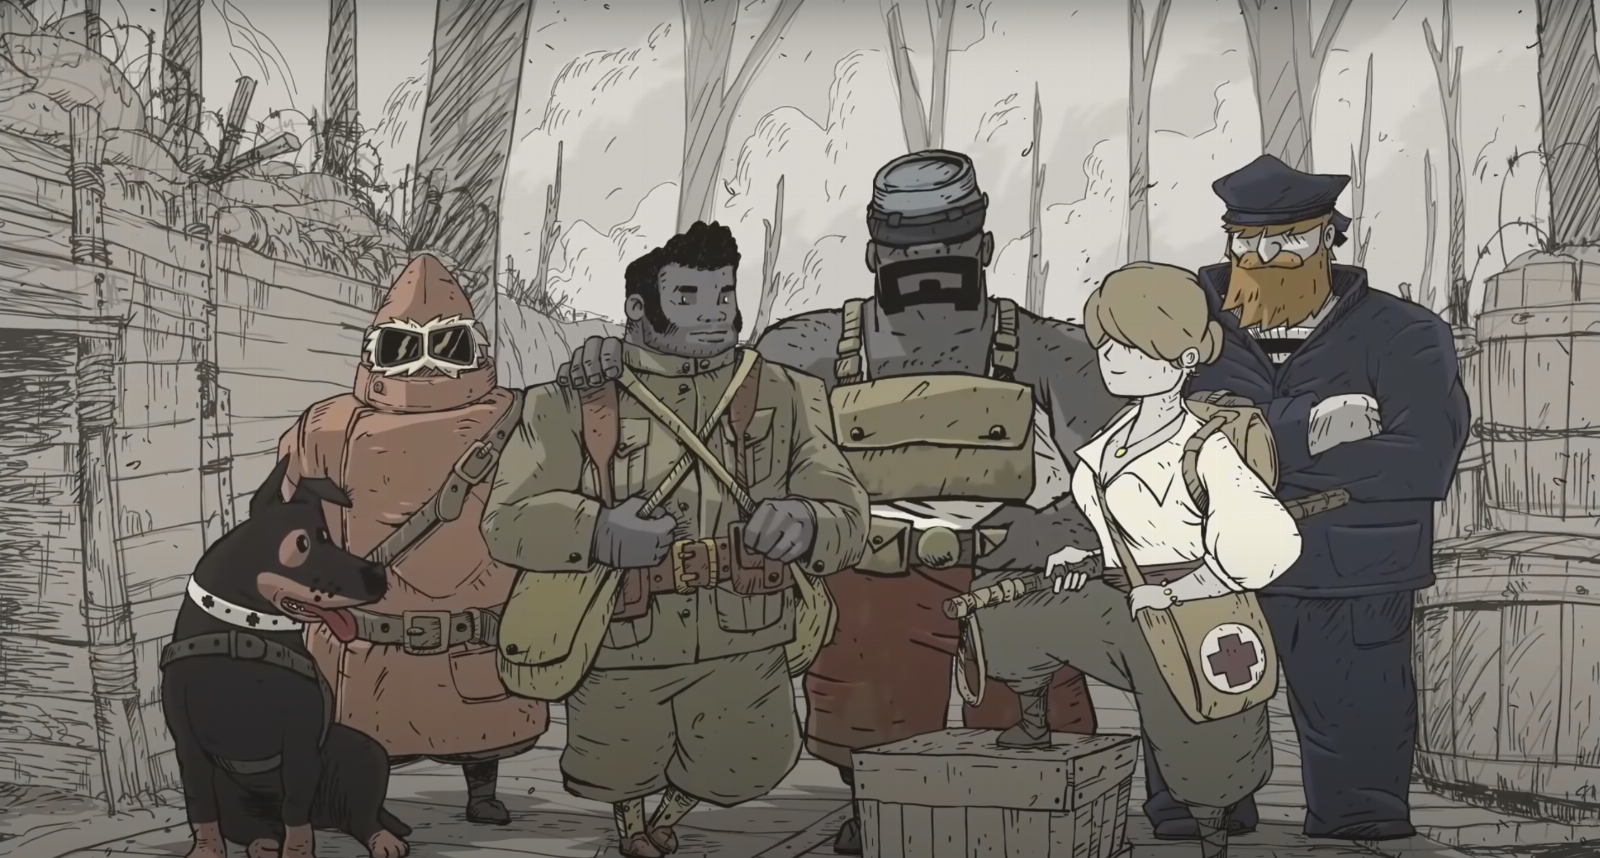 Valiant Hearts mobile game sequel is set to launch on Netflix Games on Jan 31